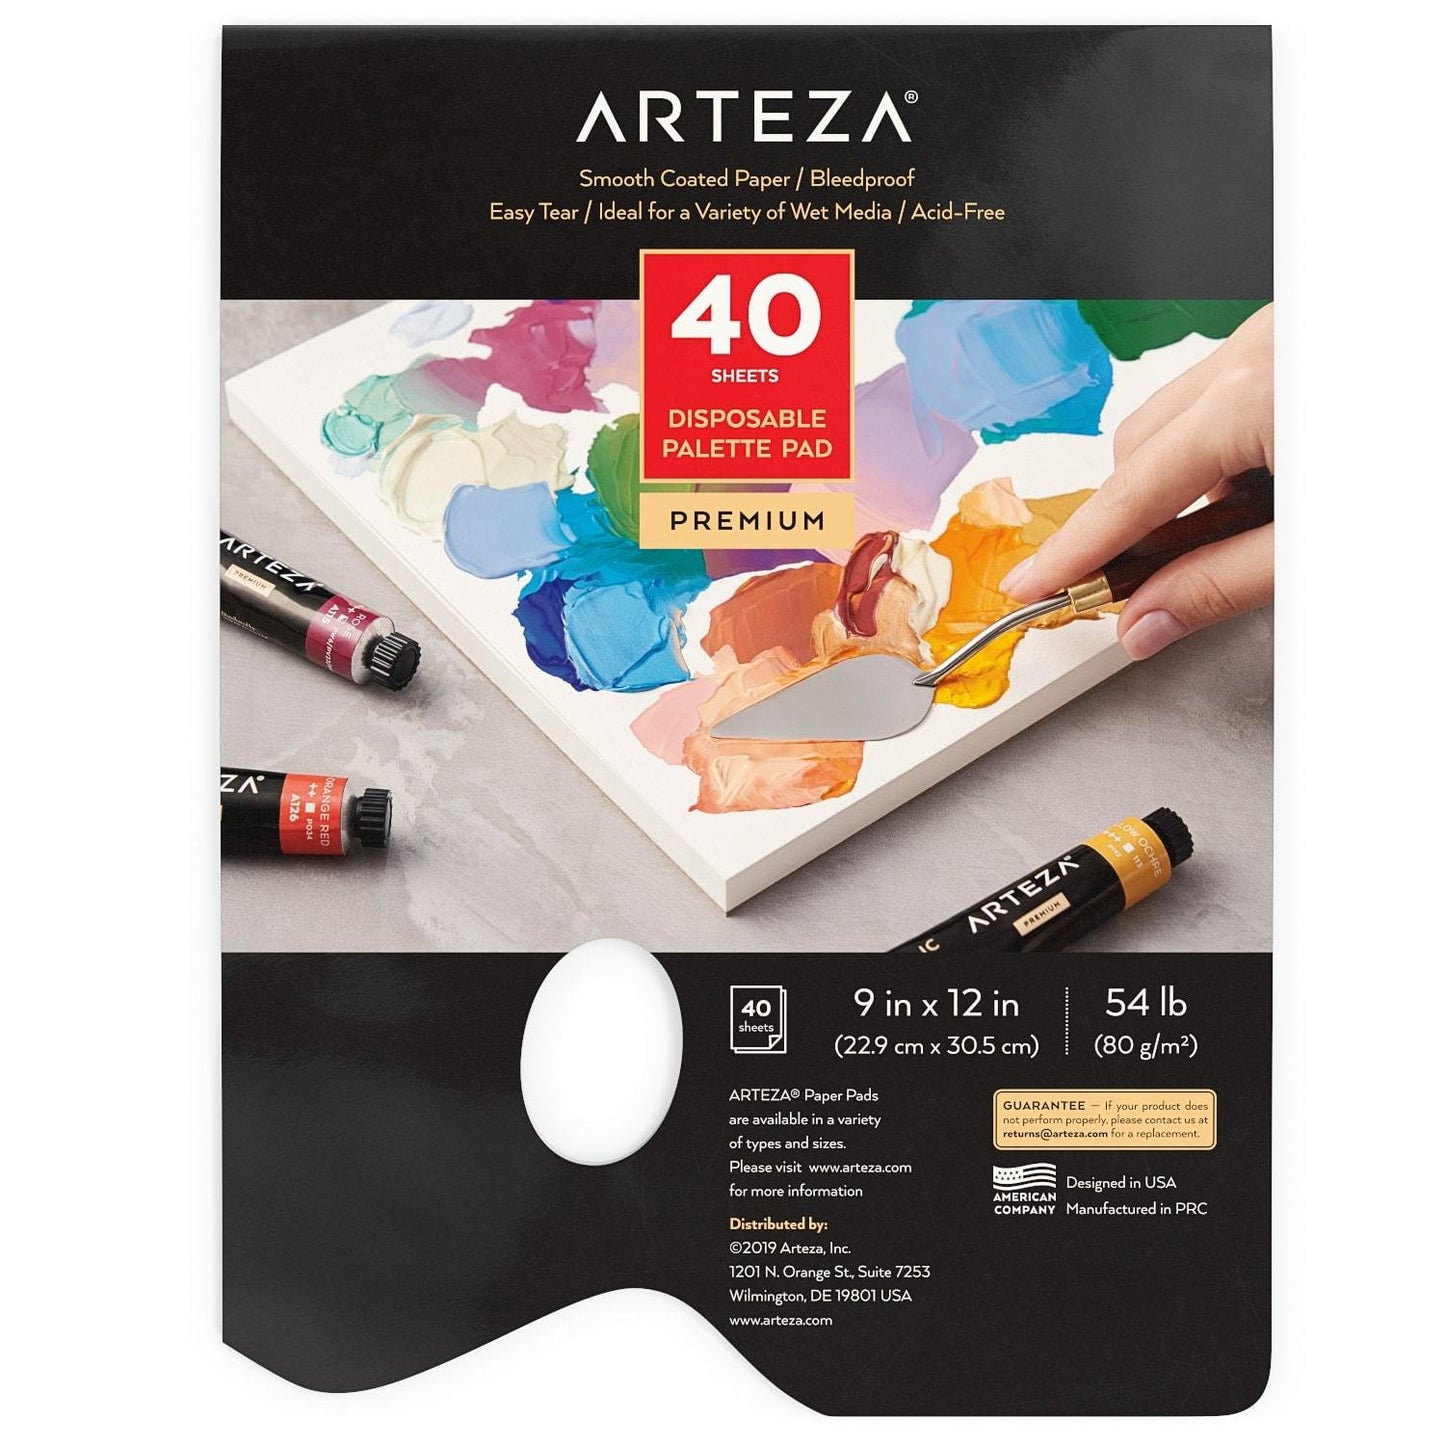 Disposable Palette Pad, 9" x 12", 40 Sheets - Pack of 2